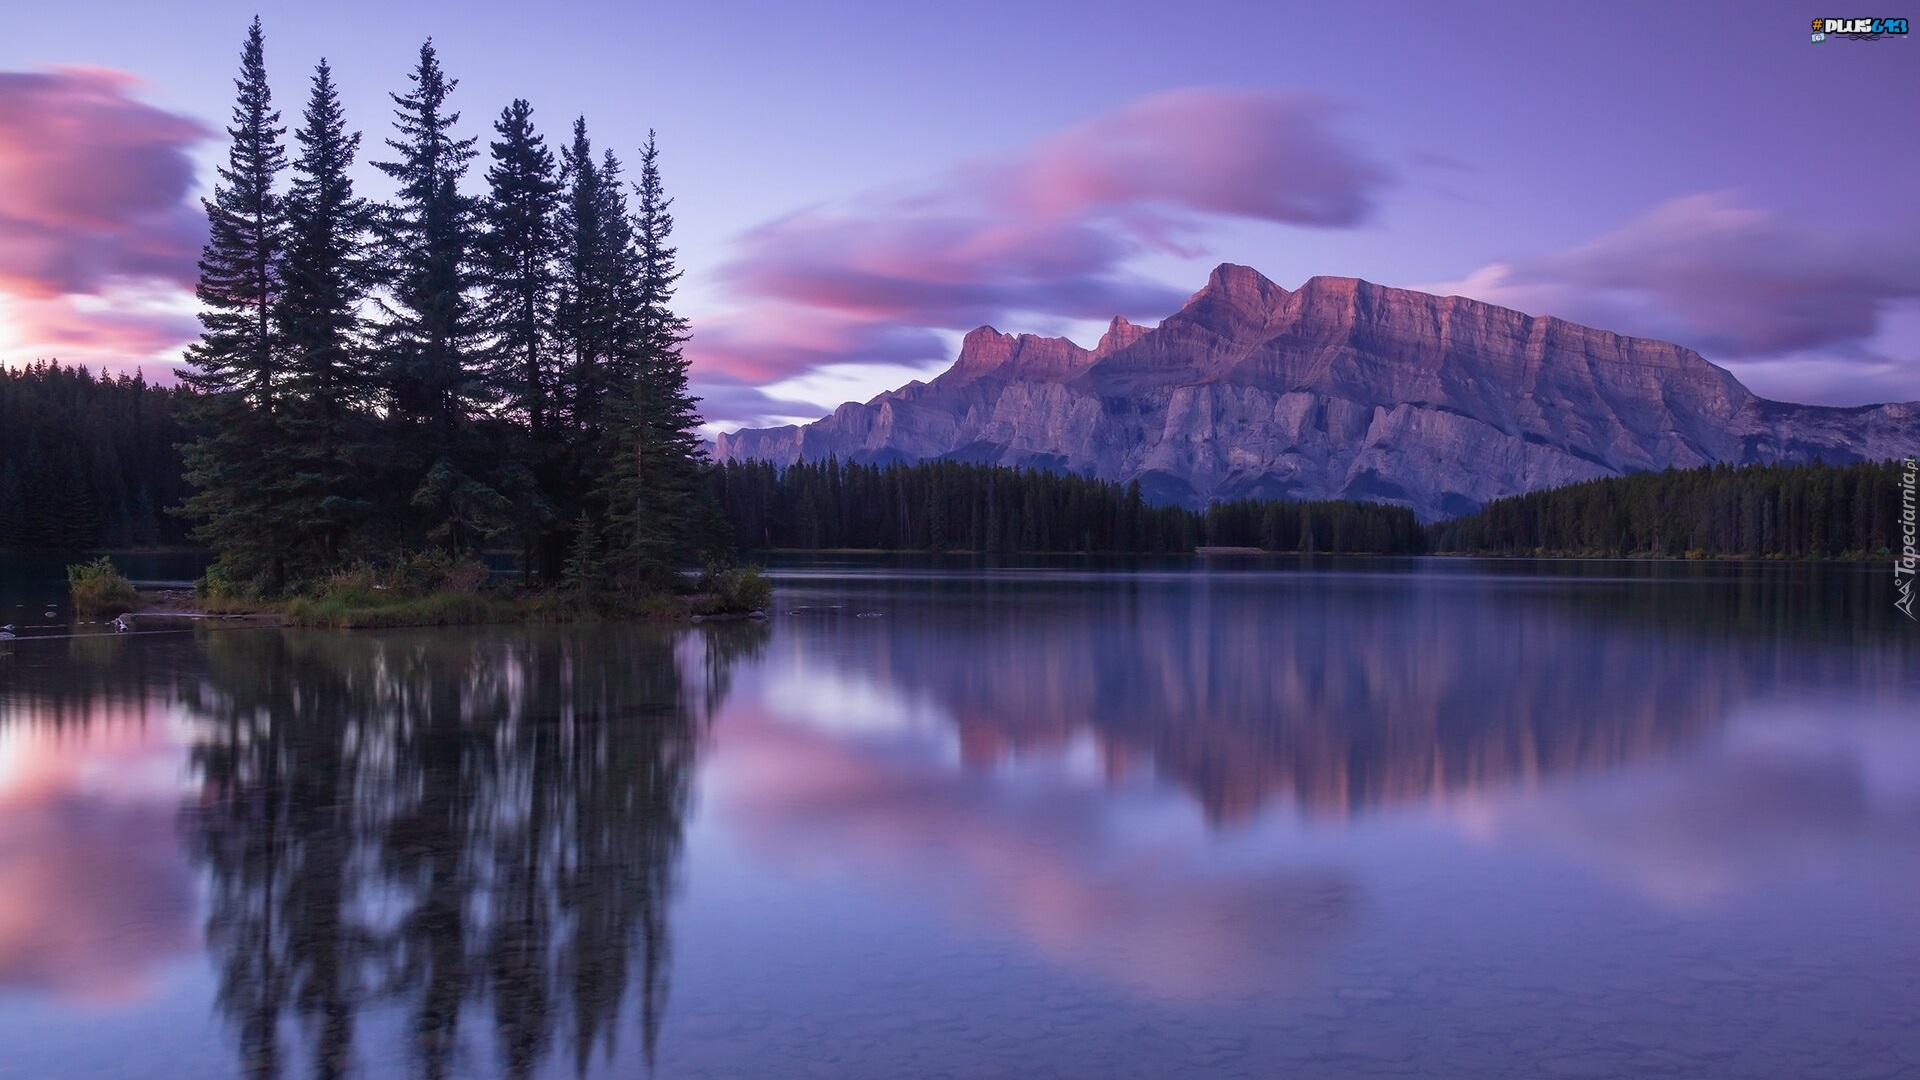 Canada - Two Jack Lake, Mt. Rundle